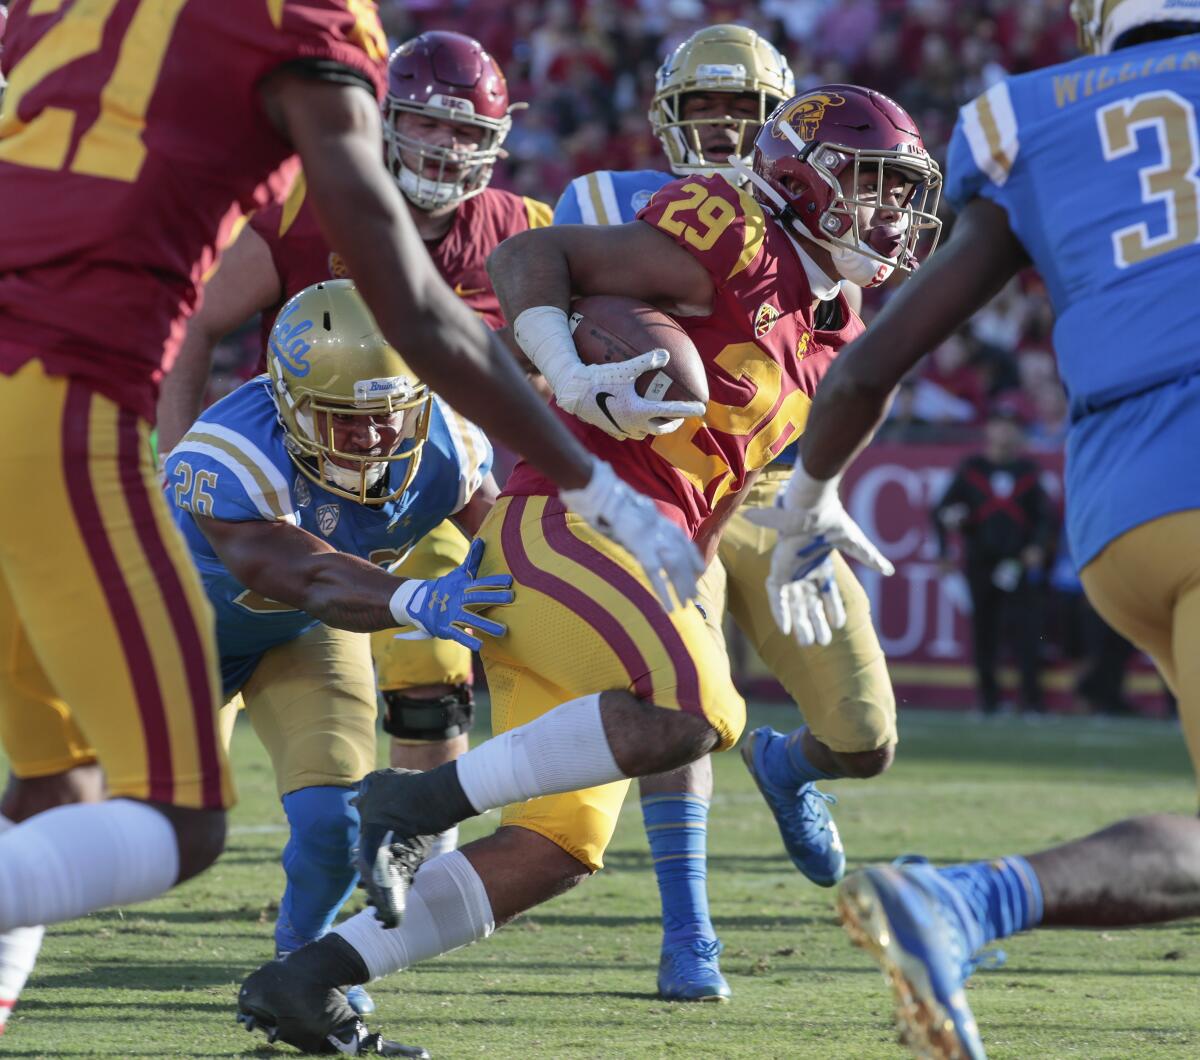 USC running back Vavae Malepeai (29) eludes the tackle of UCLA linebacker Leni Toailoa (26) for a touchdown run in the third quarter at the Coliseum on Saturday.